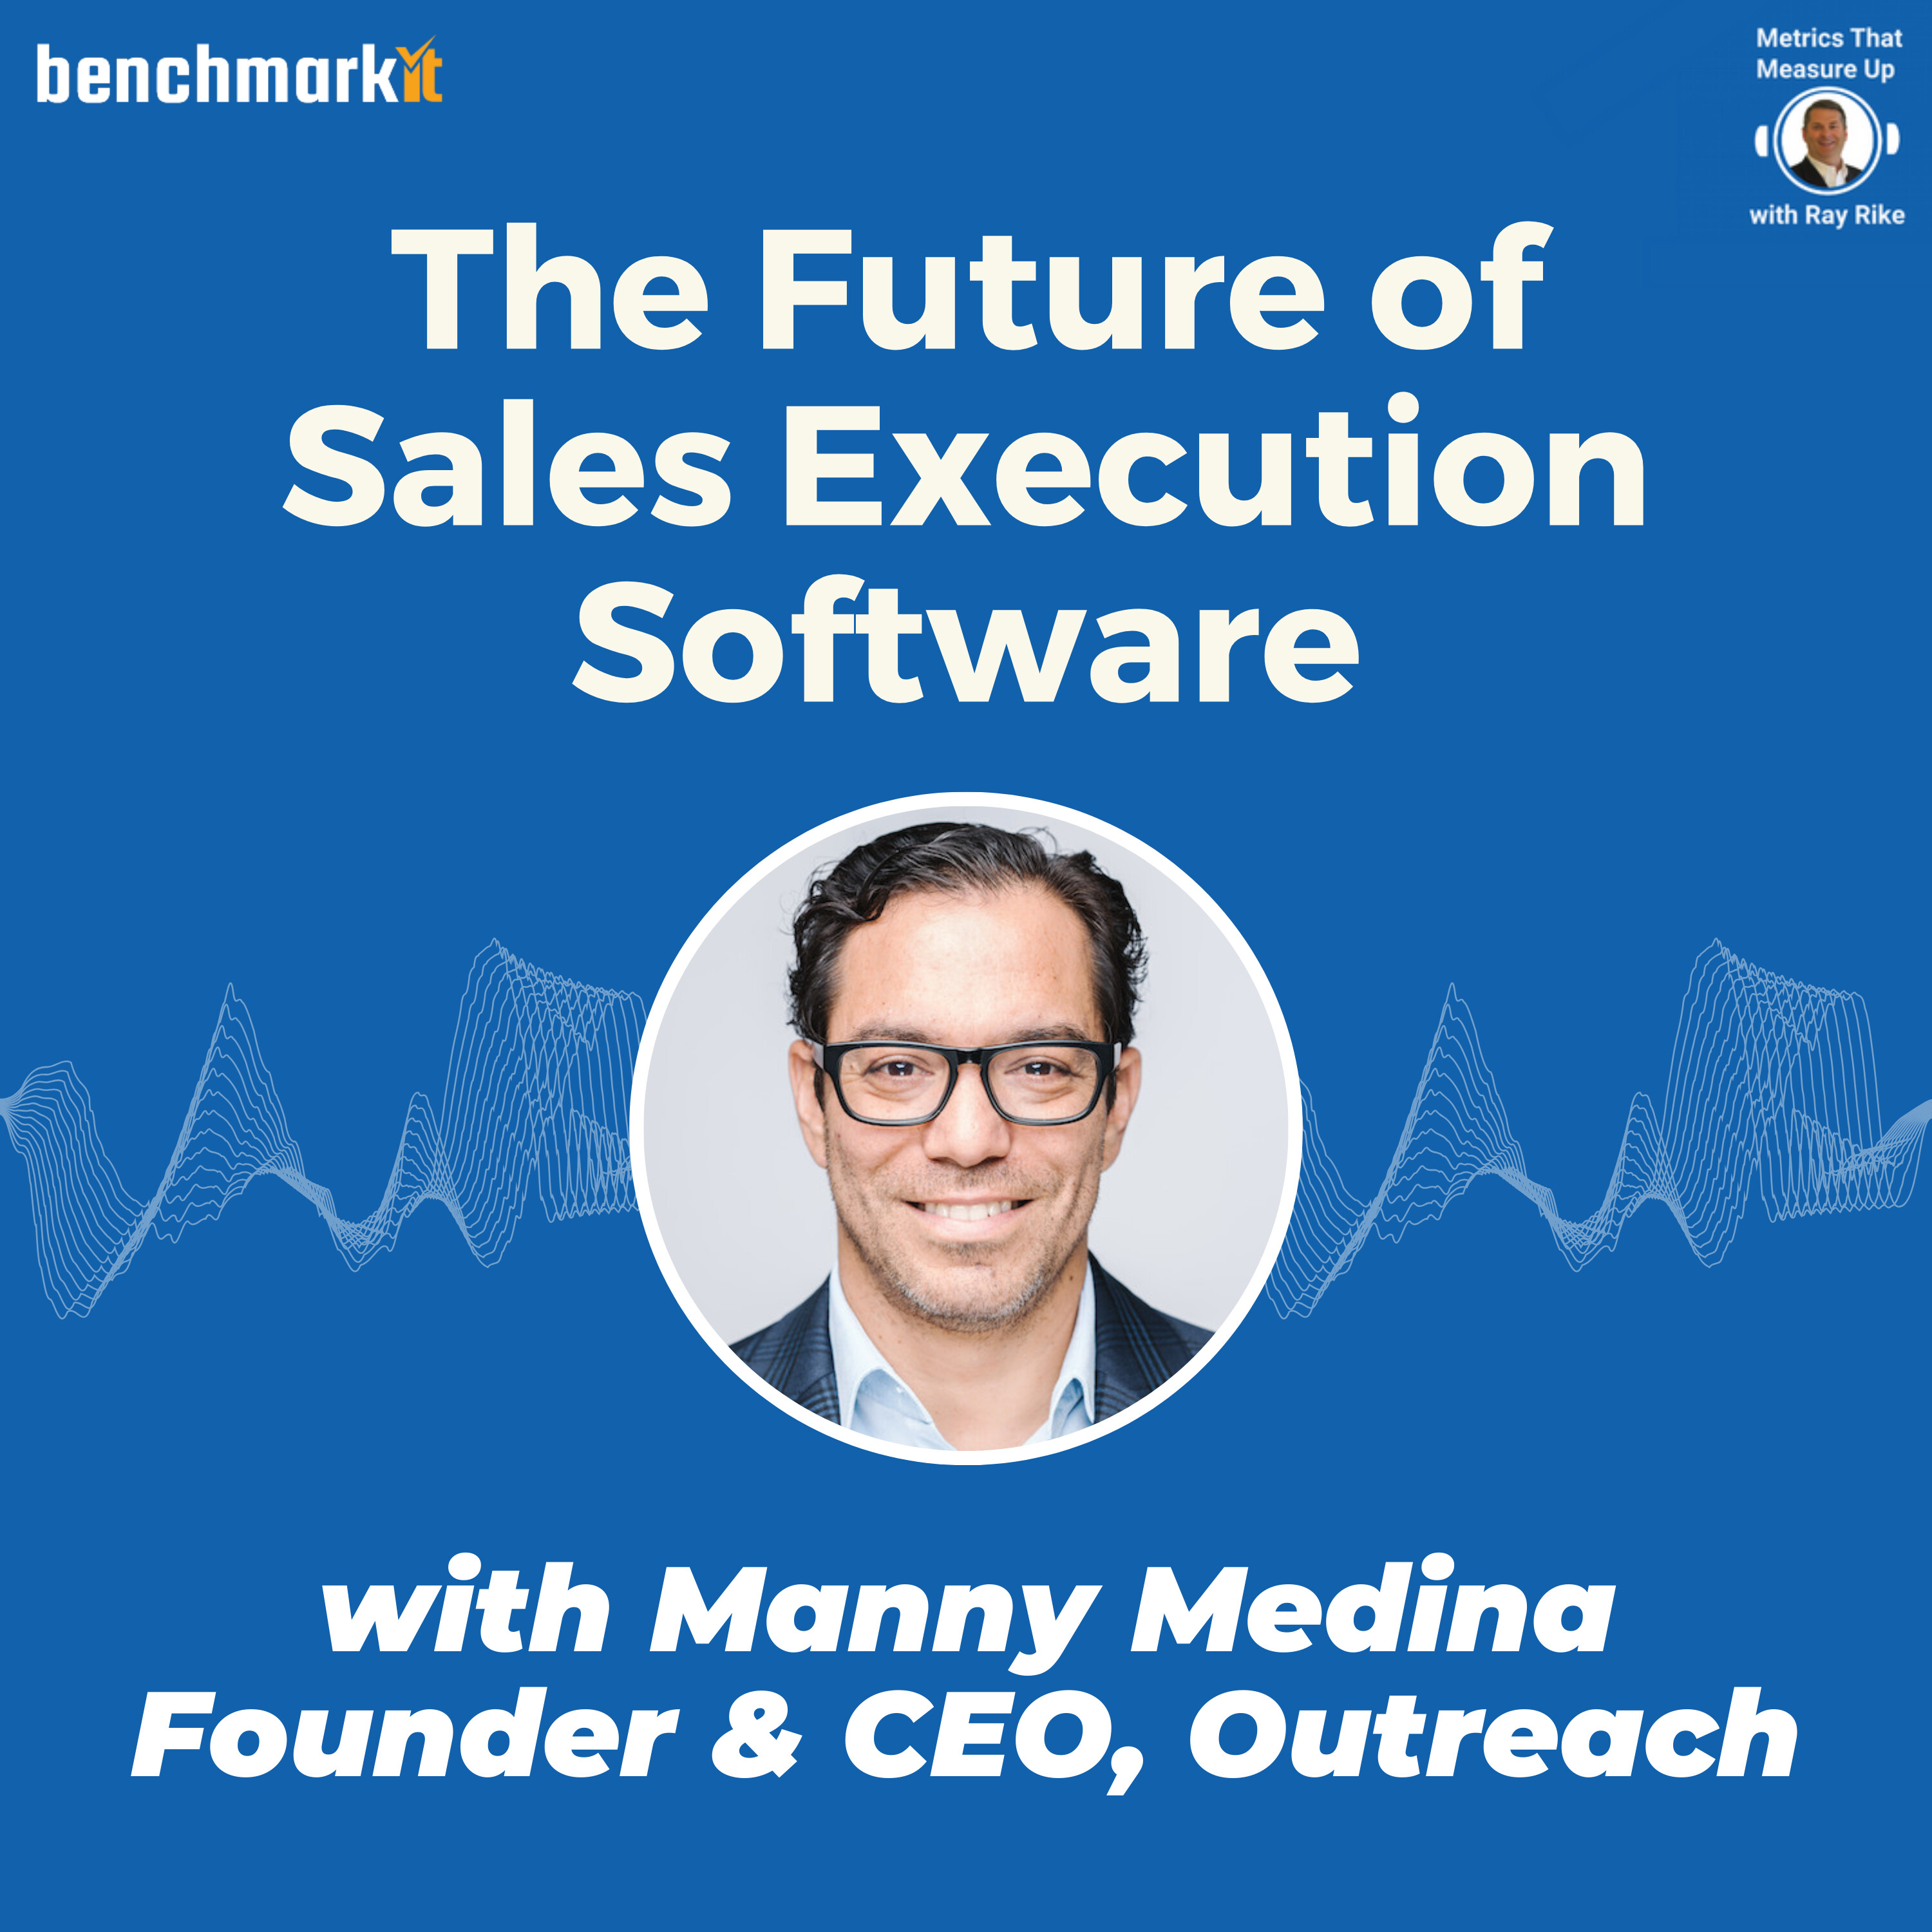 The Future of Sales Execution - with Manny Medina, Founder and CEO Outreach